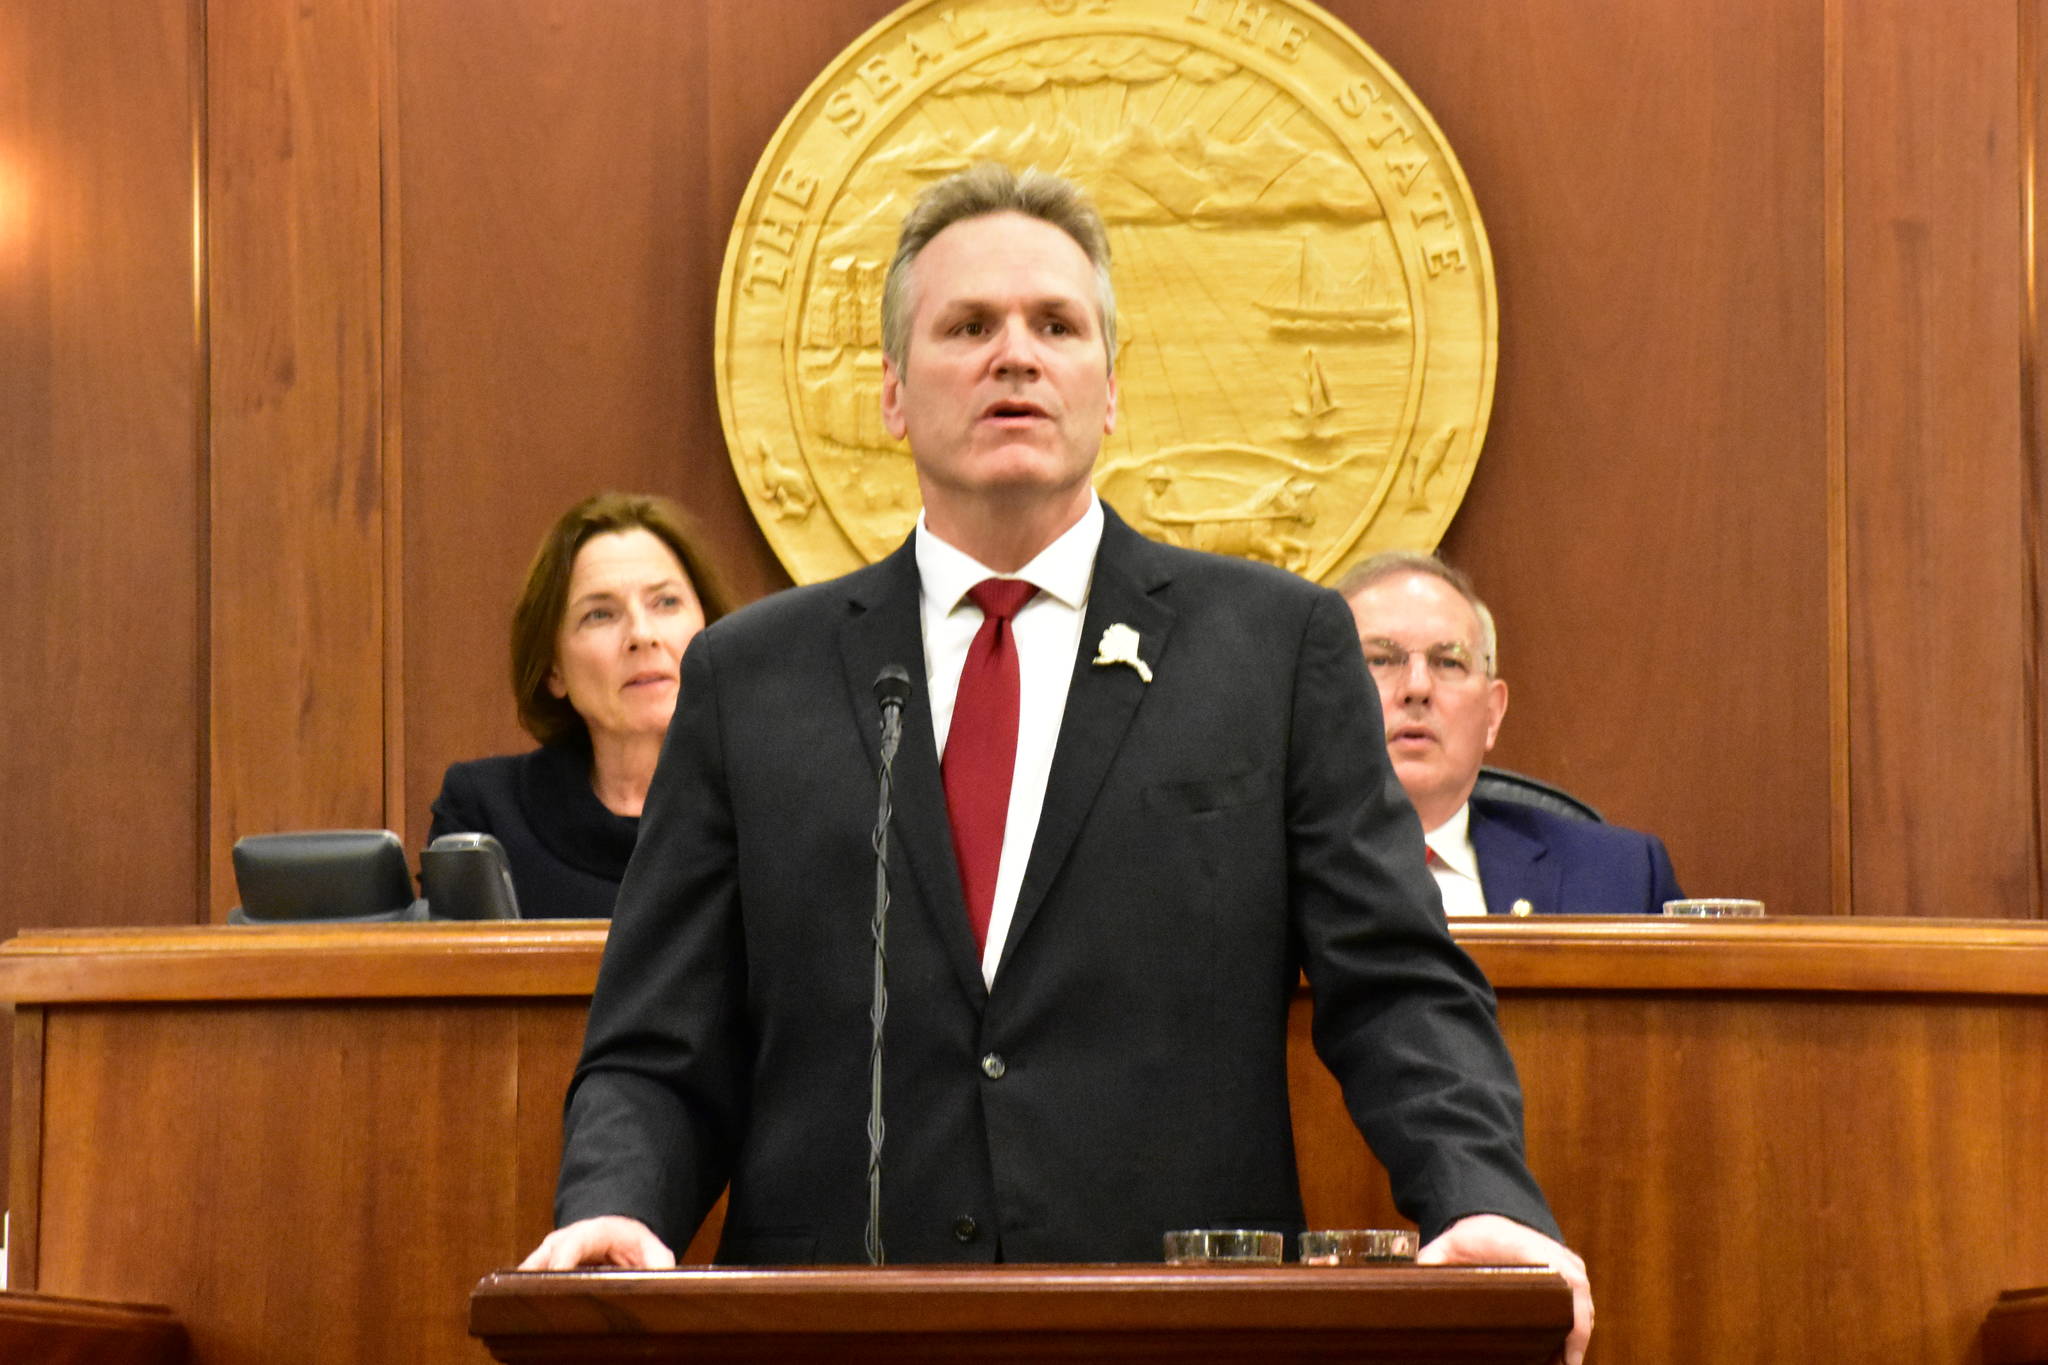 Gov. Mike Dunleavy give his State of the State address to a joint session of the Alaska Legislature on Monday, Jan. 27, 2020 in Juneau, Alaska. (Photo by Peter Segall/Juneau Empire)